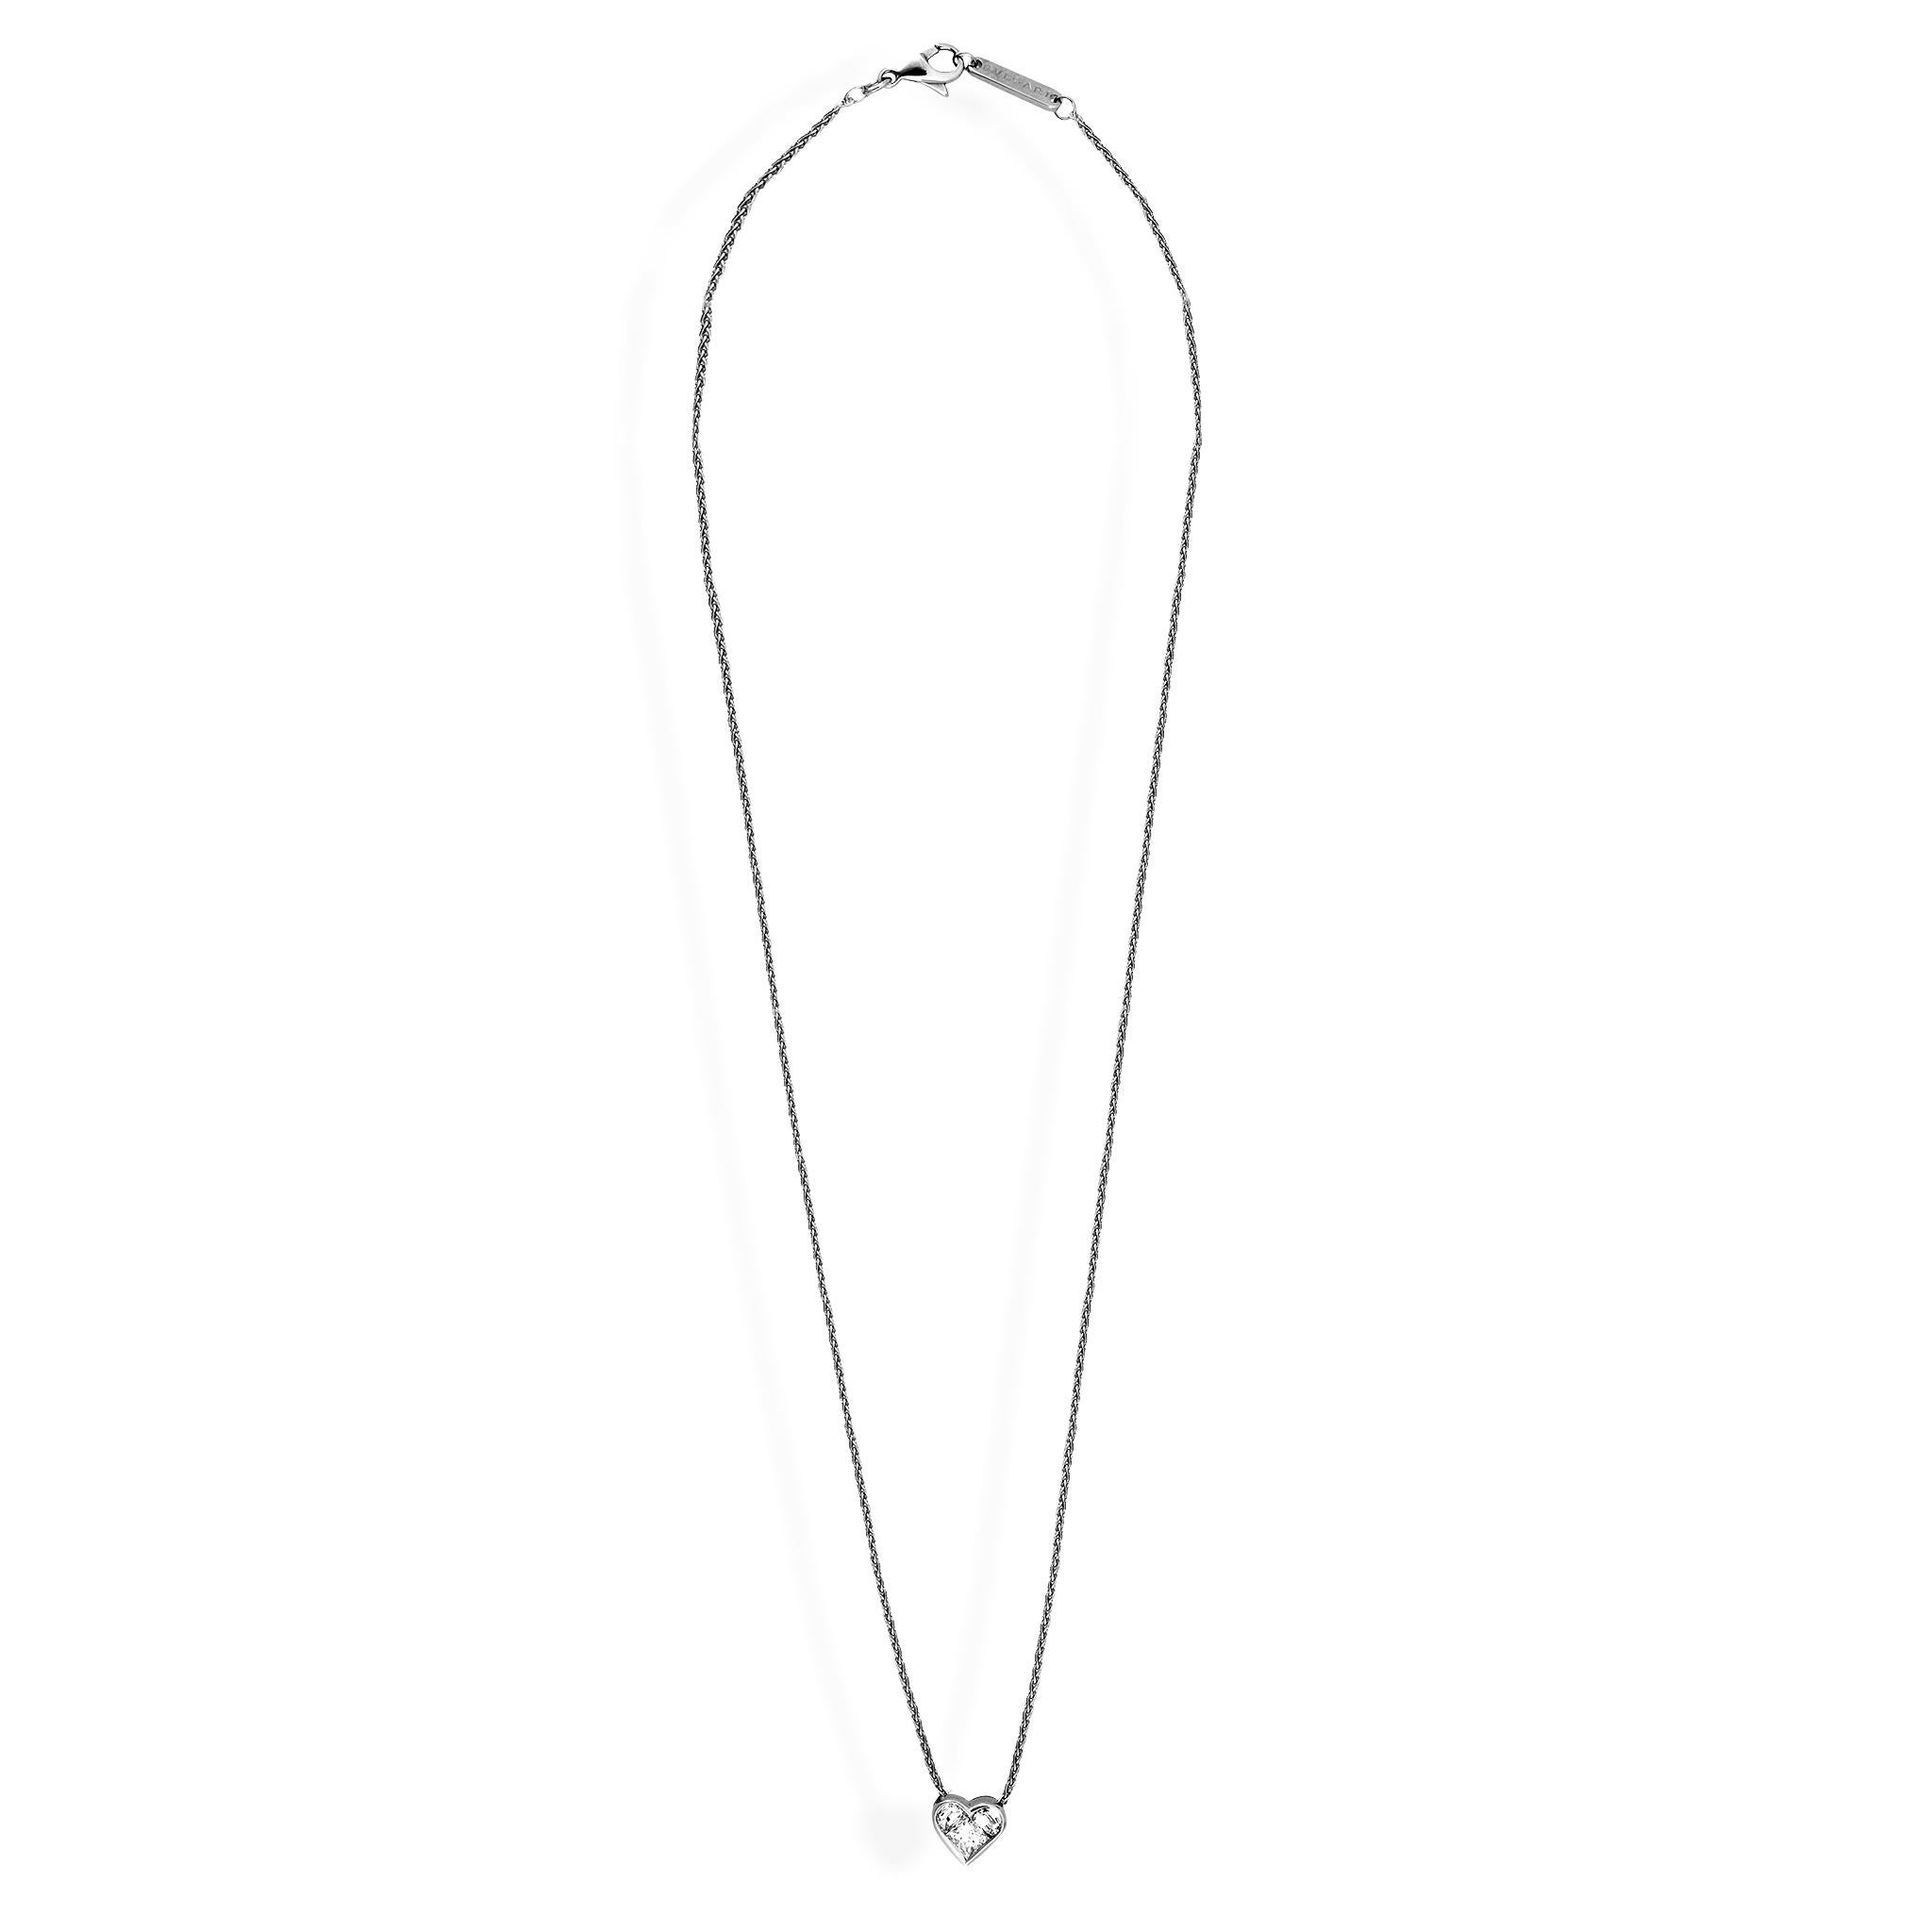 18K White Gold
Diamond: 0.46 ct twd
Total Weight: 4.3 grams
Necklace Length: 16.75 inches